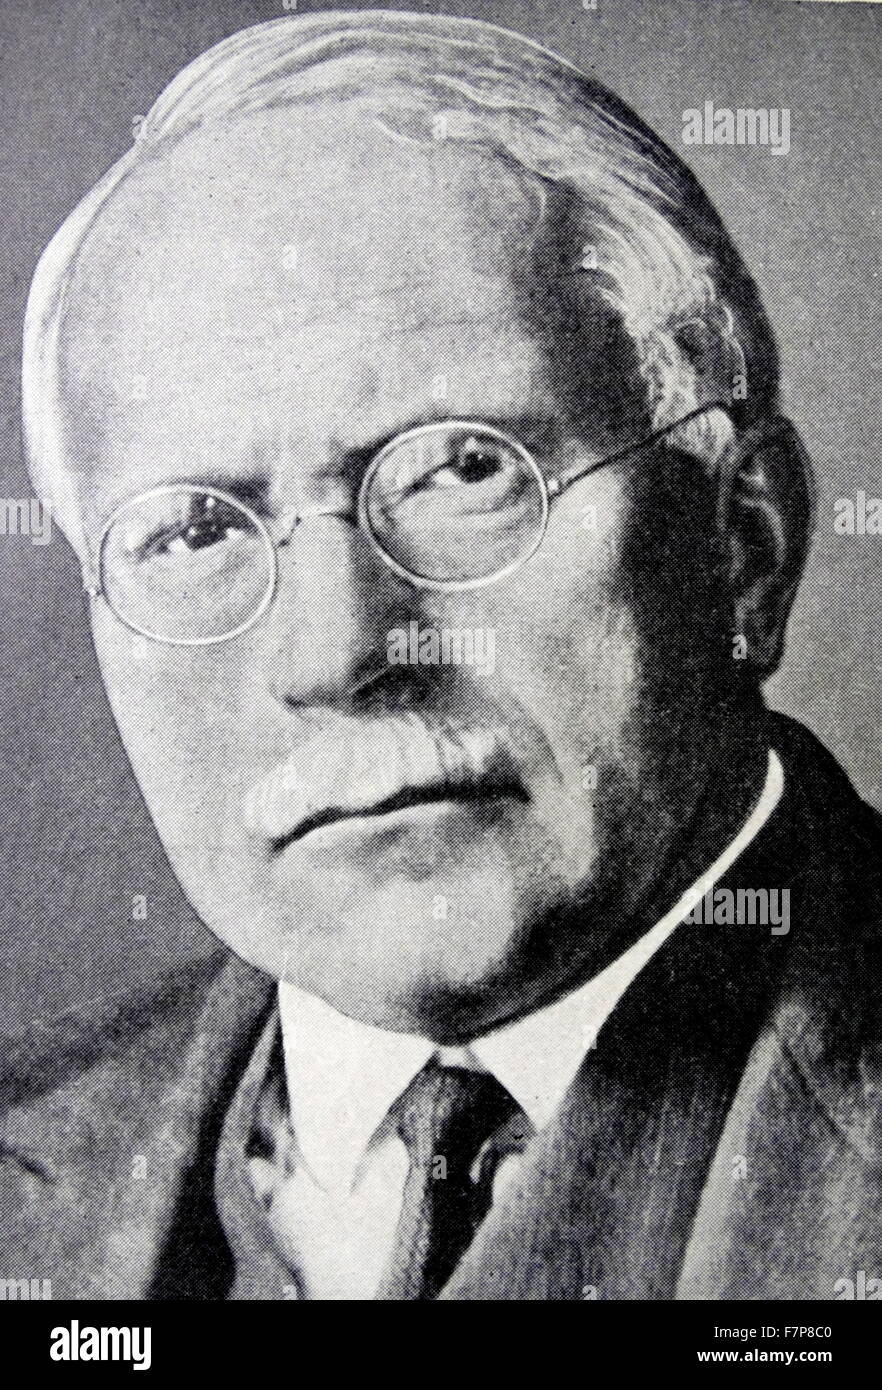 DR. CARL G. JUNG.Born in Switzerland in 1875, founded school of Psycho -therapy at Zurich. Once a disciple of Freud,he came to disagree with him on important issues and developed his own theories.(esp. dreams). Stock Photo